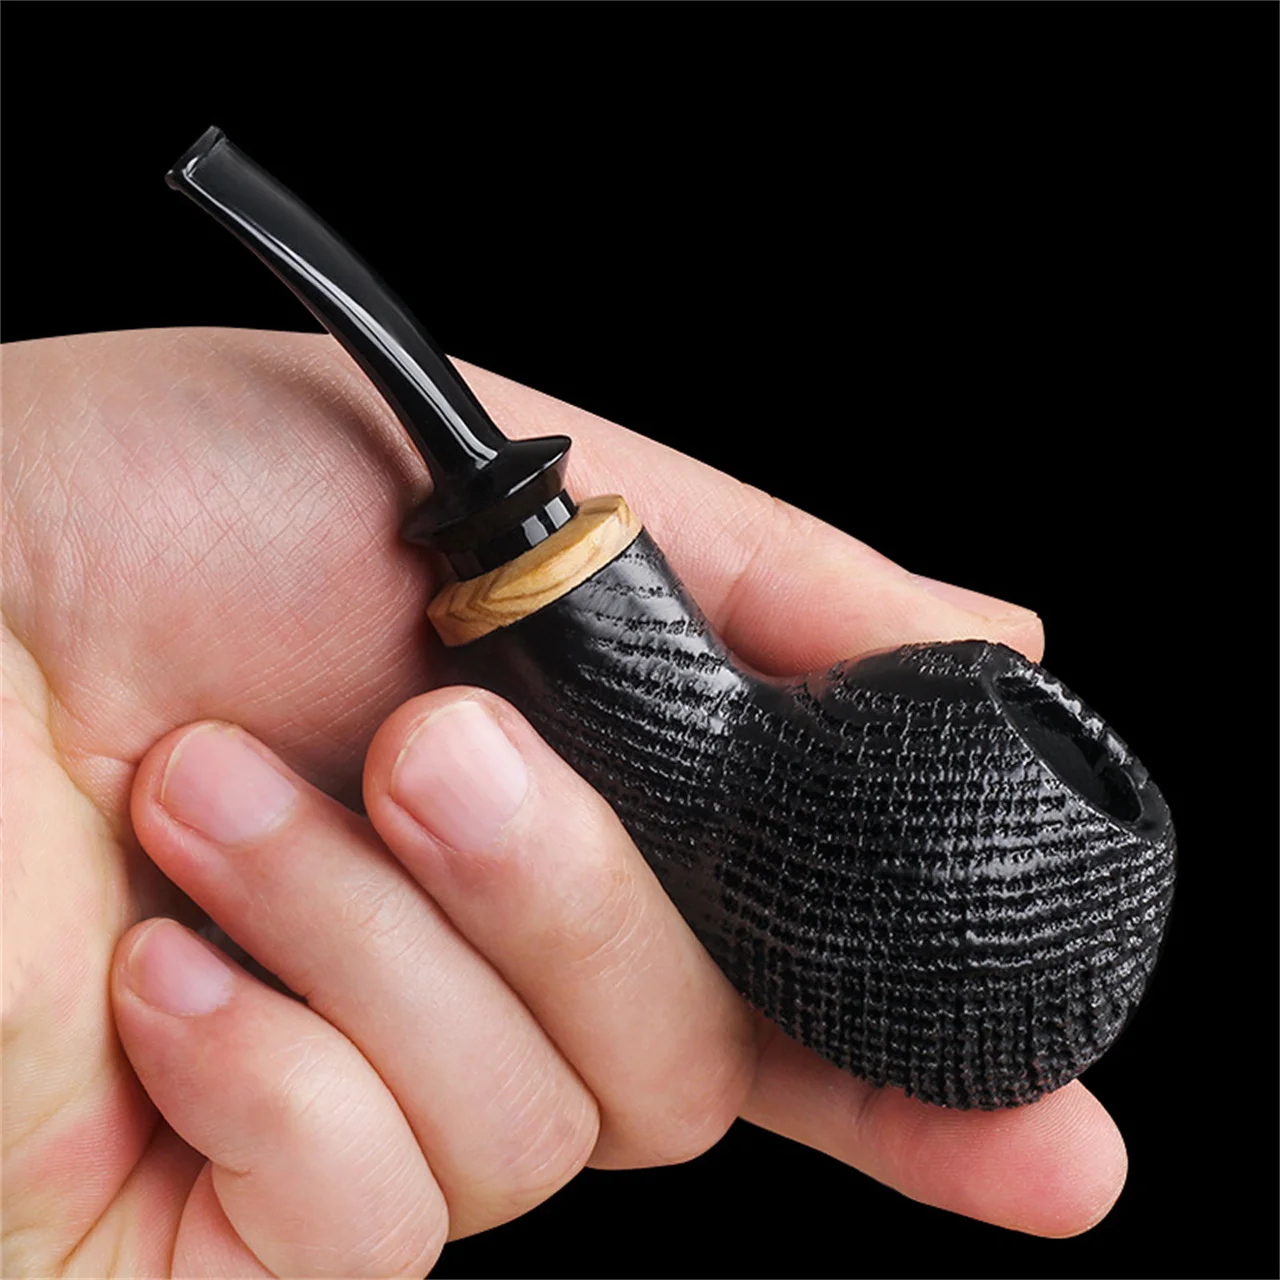 

Pipe Retro Handmade Type Bent Gift Accessory Army Tobacco Filter Pipe Handle Mount Cut 3mm With Gentleman Wood Oak Black Smoking